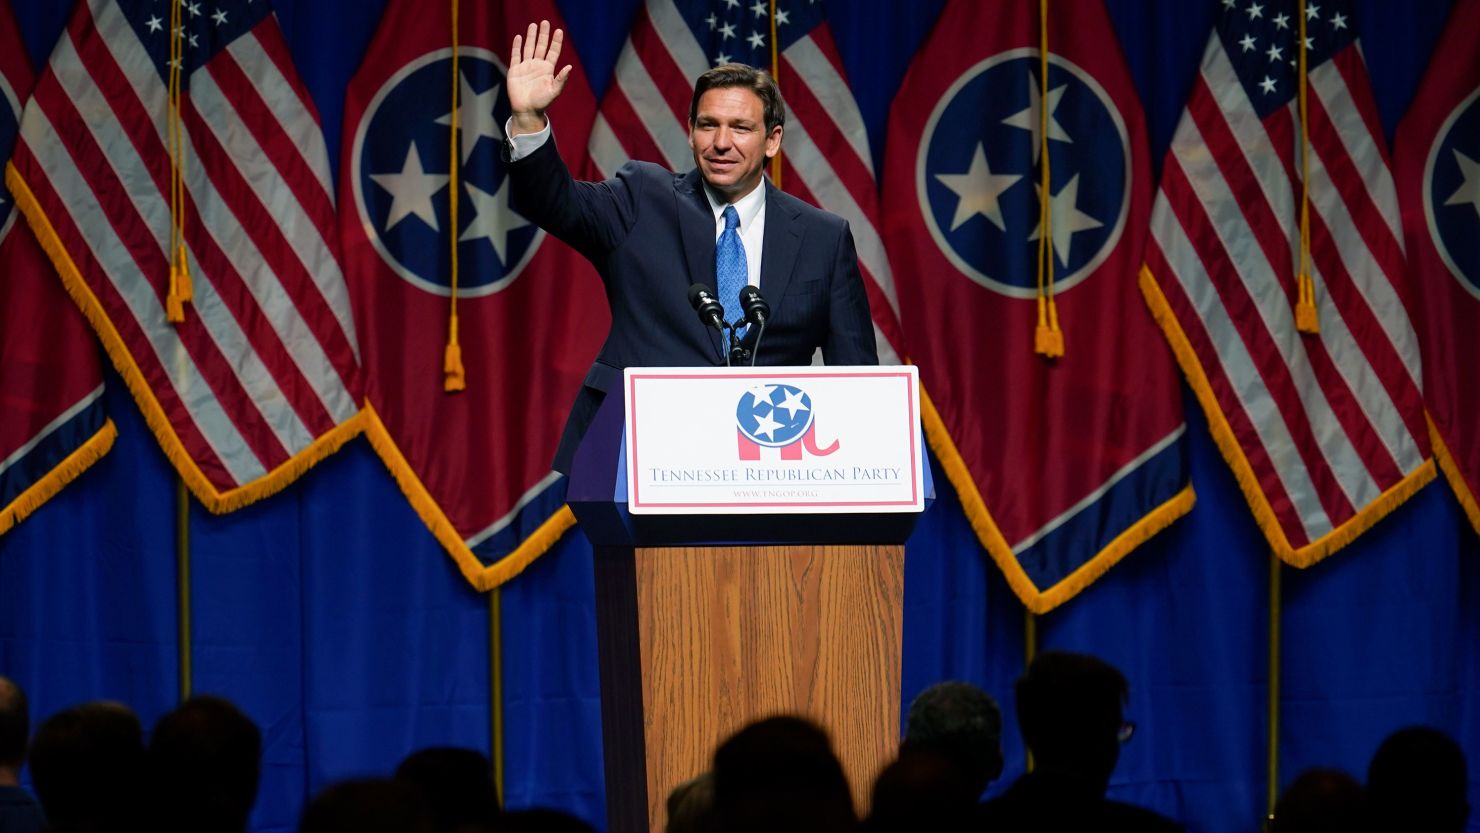 Republican presidential candidate Ron DeSantis speaks at a Tennessee GOP event in Nashville on July 15, 2023.